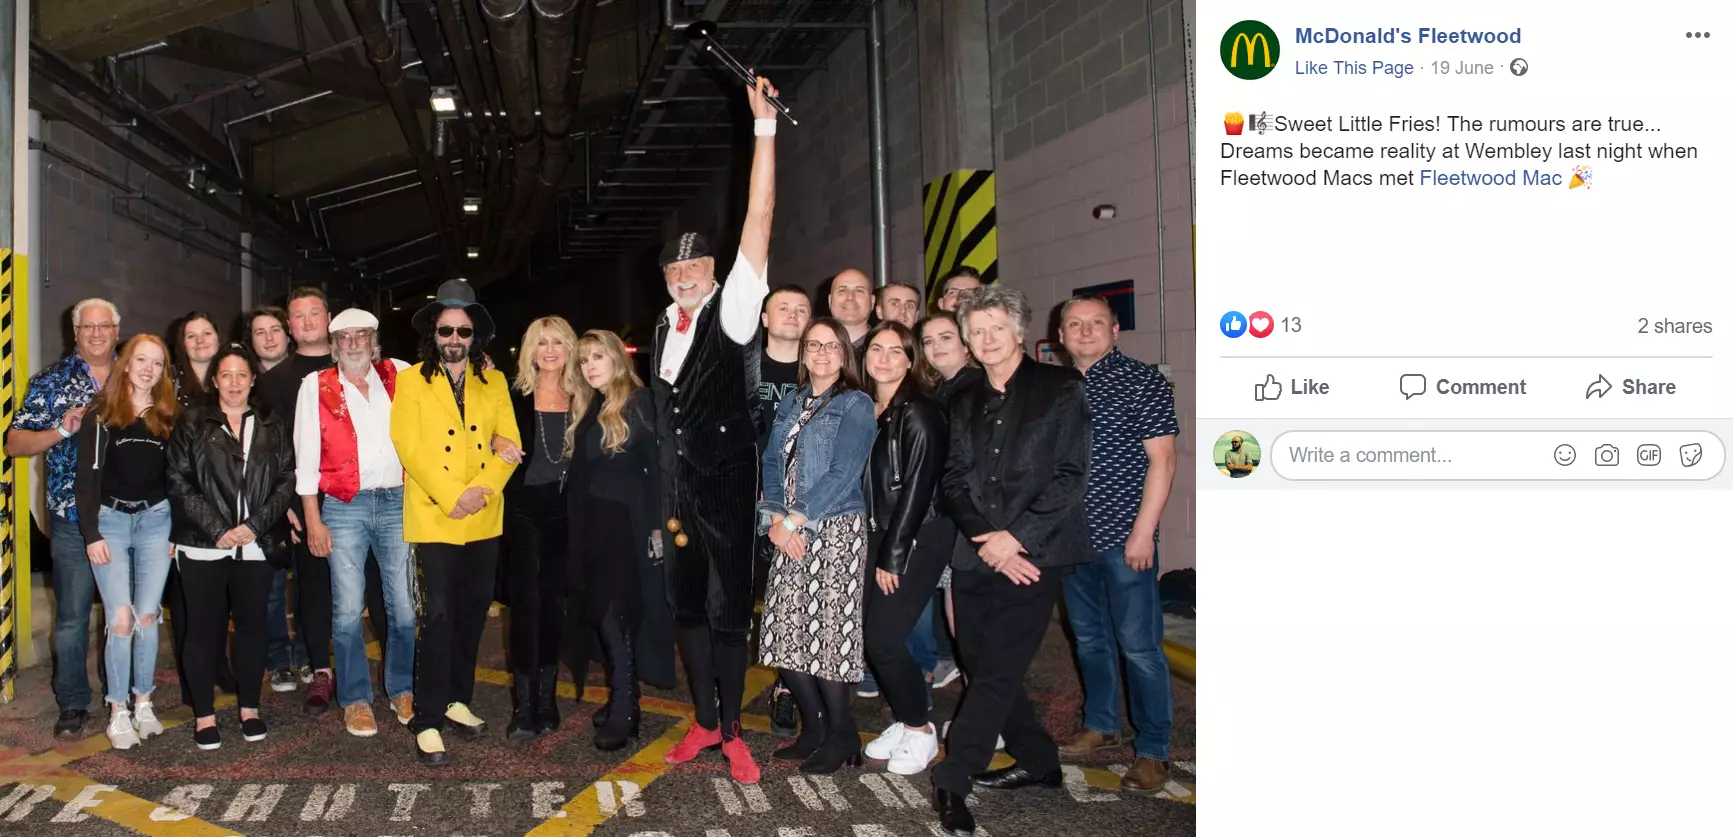 Fleetwood Mac invited staff from McDonald's in Fleetwood to their gig at Wembley.